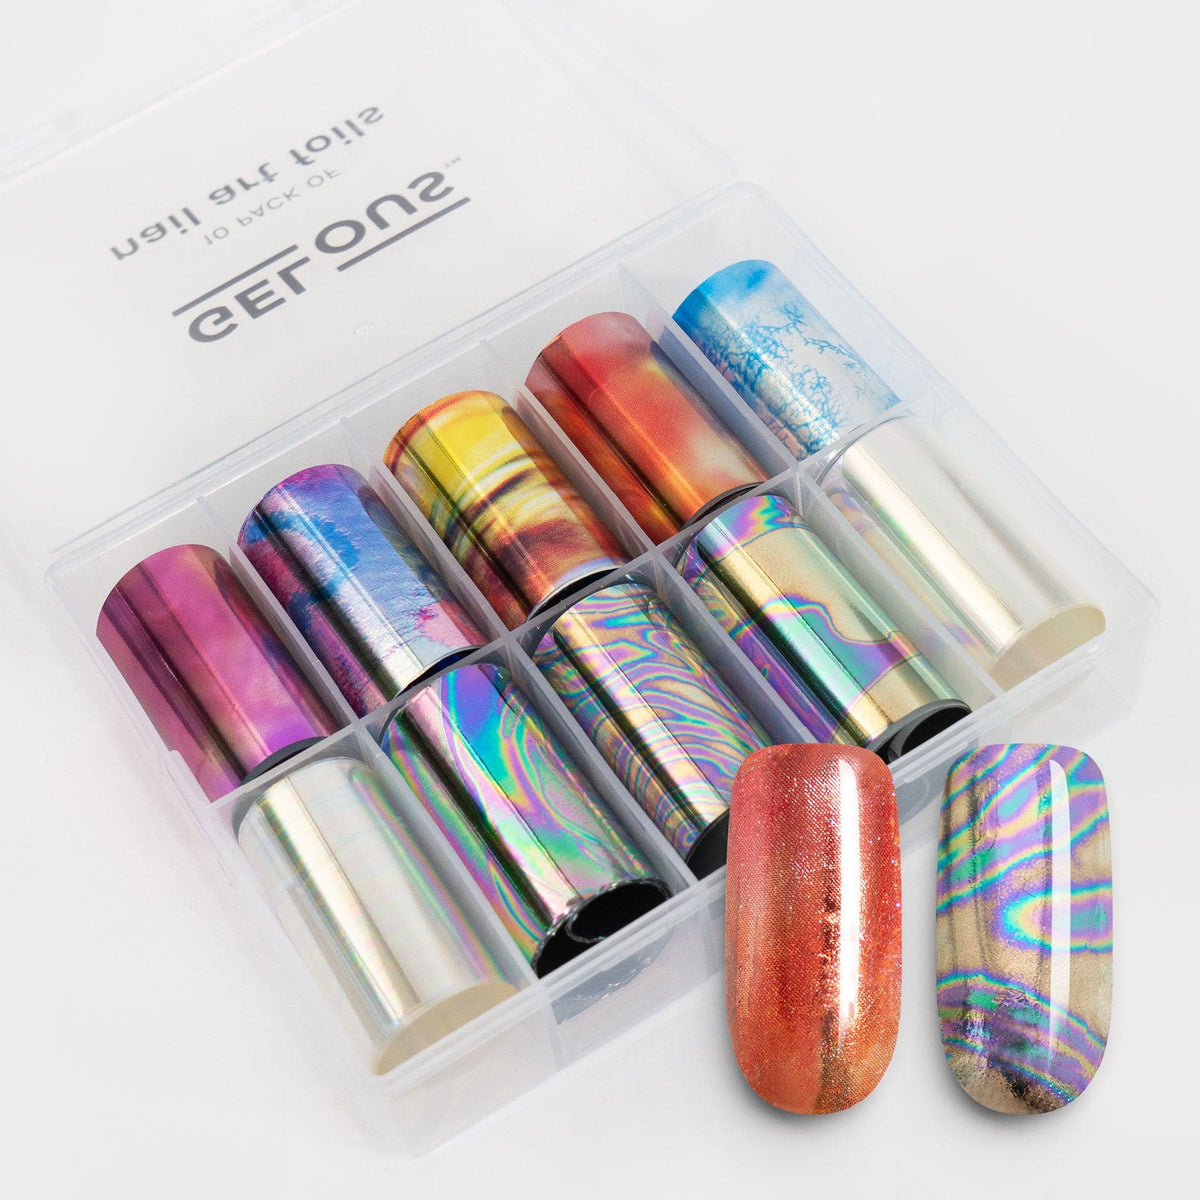 Gelous Iridescence Nail Art Foils product photo - photographed in New Zealand